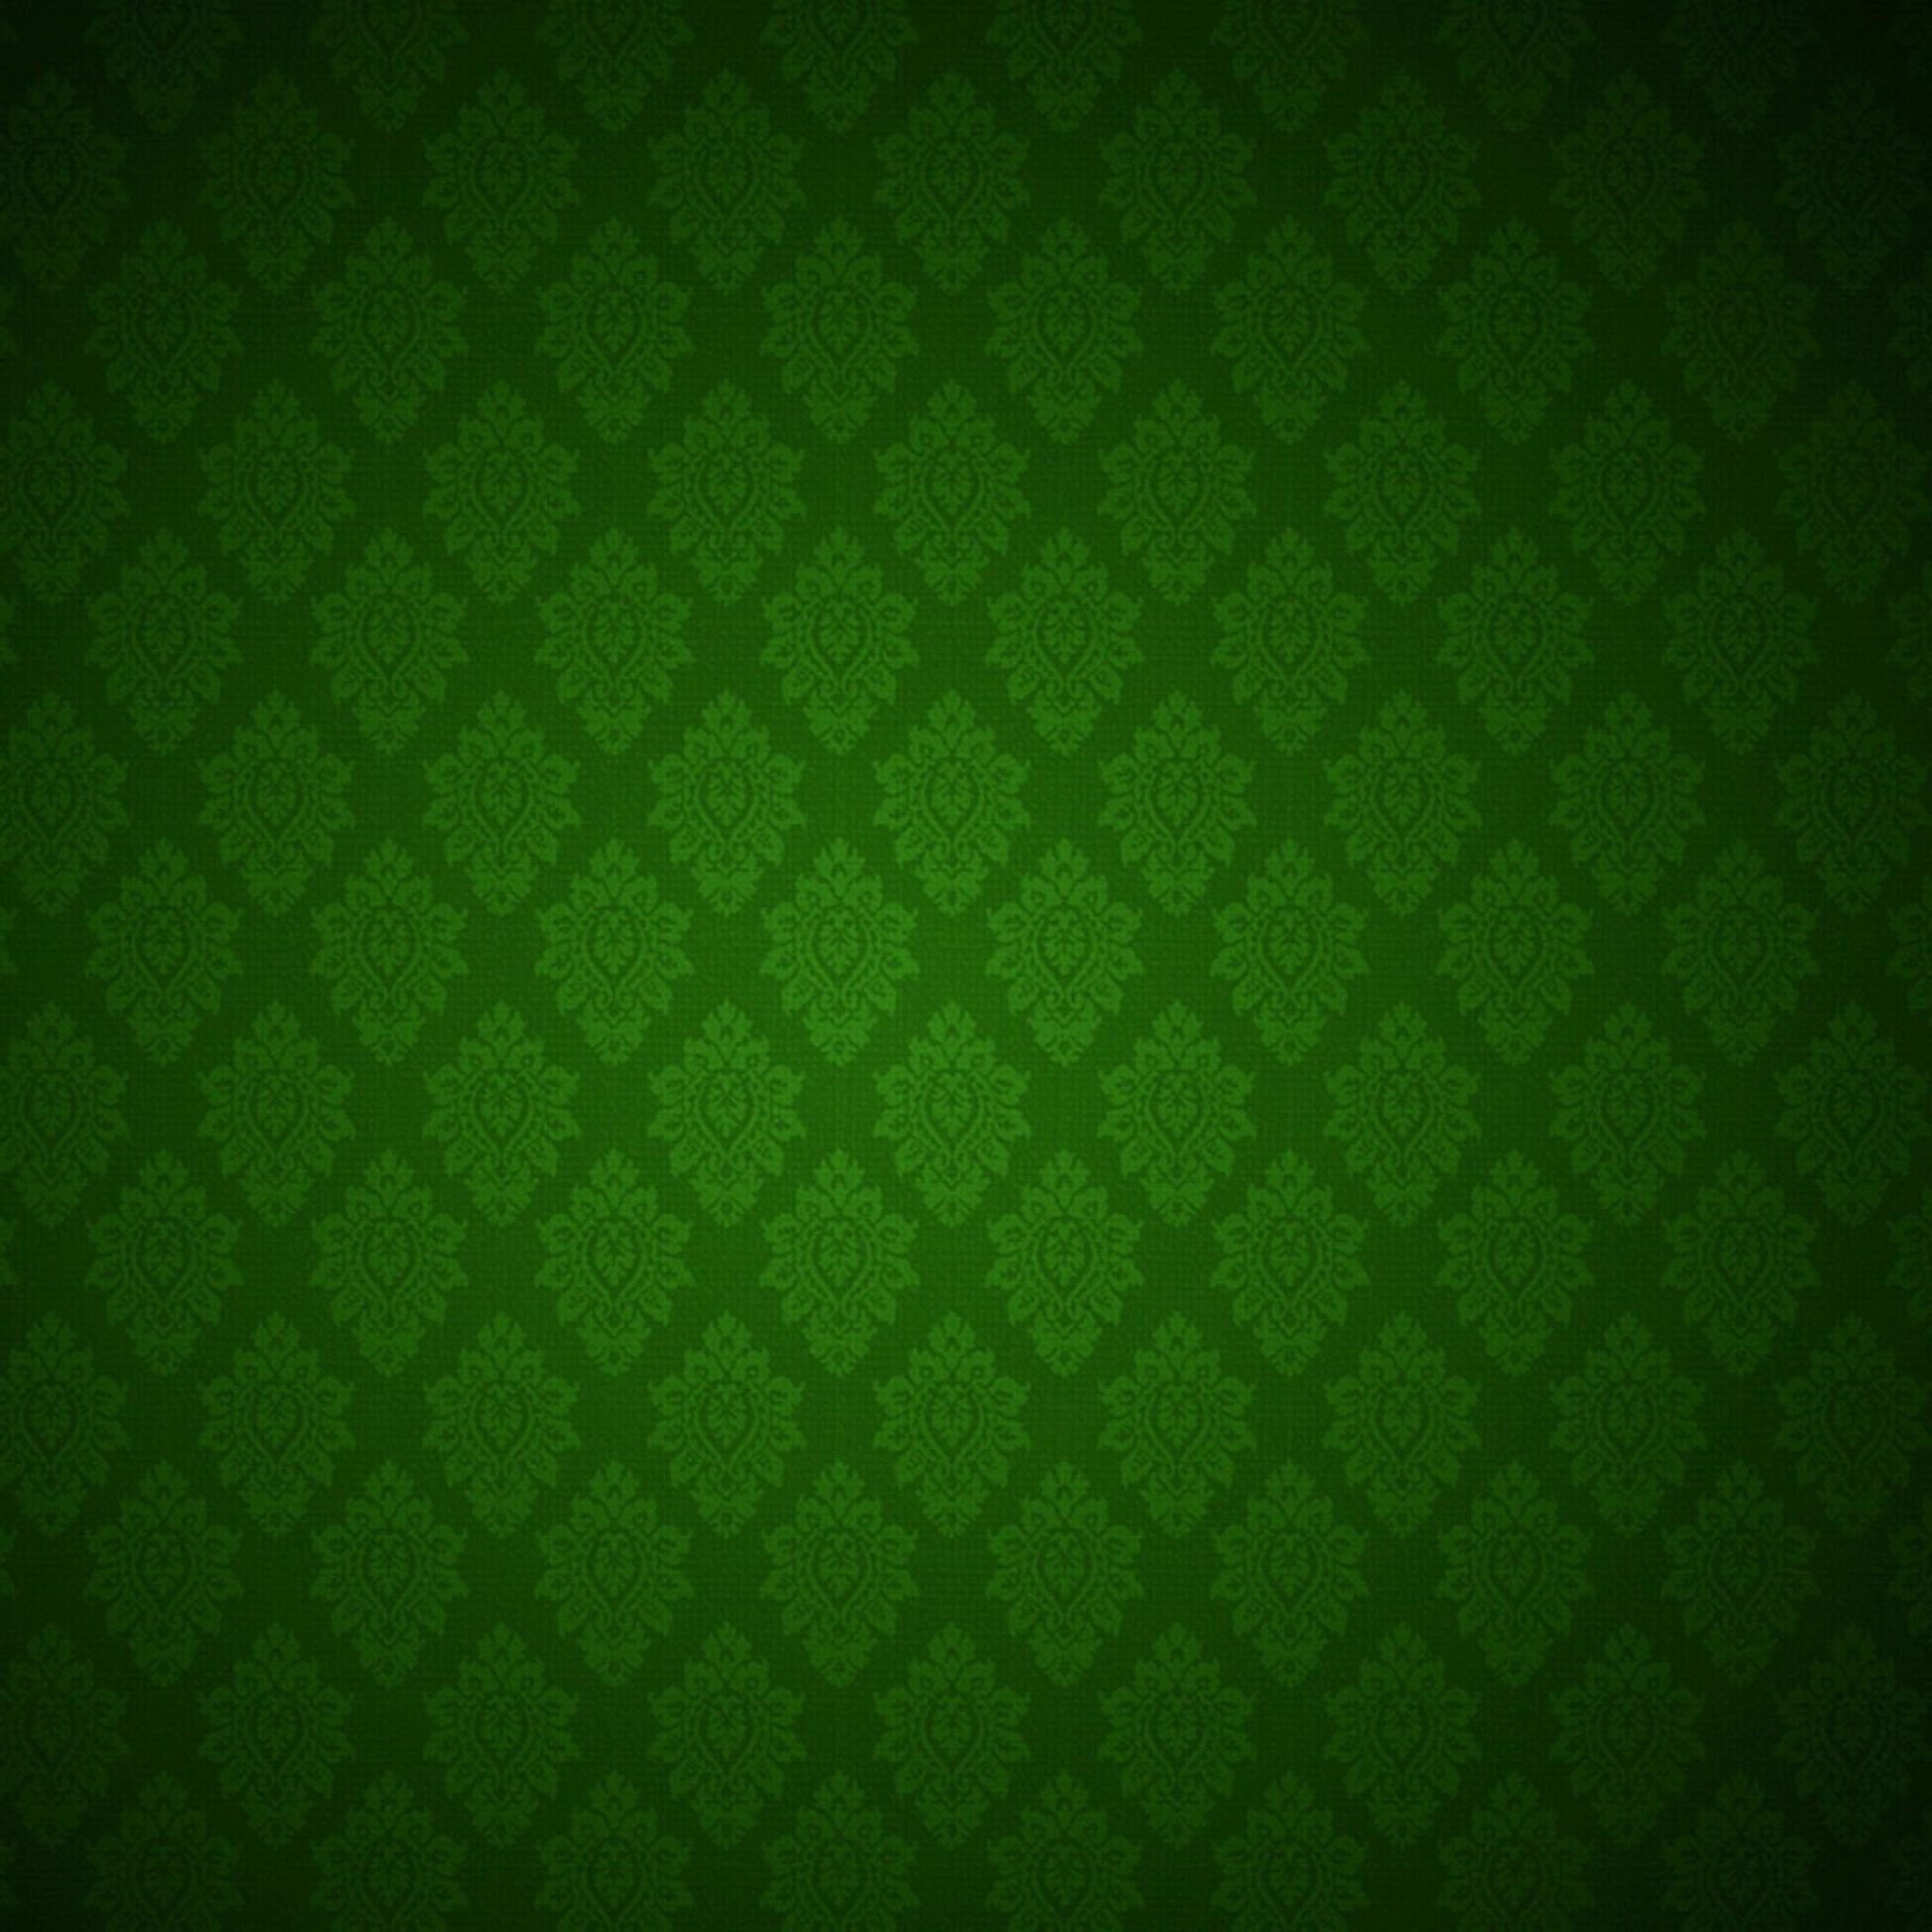 Green Abstracto Textura Verde Rombos Wallpaper HD Wallpapers Backgrounds Images